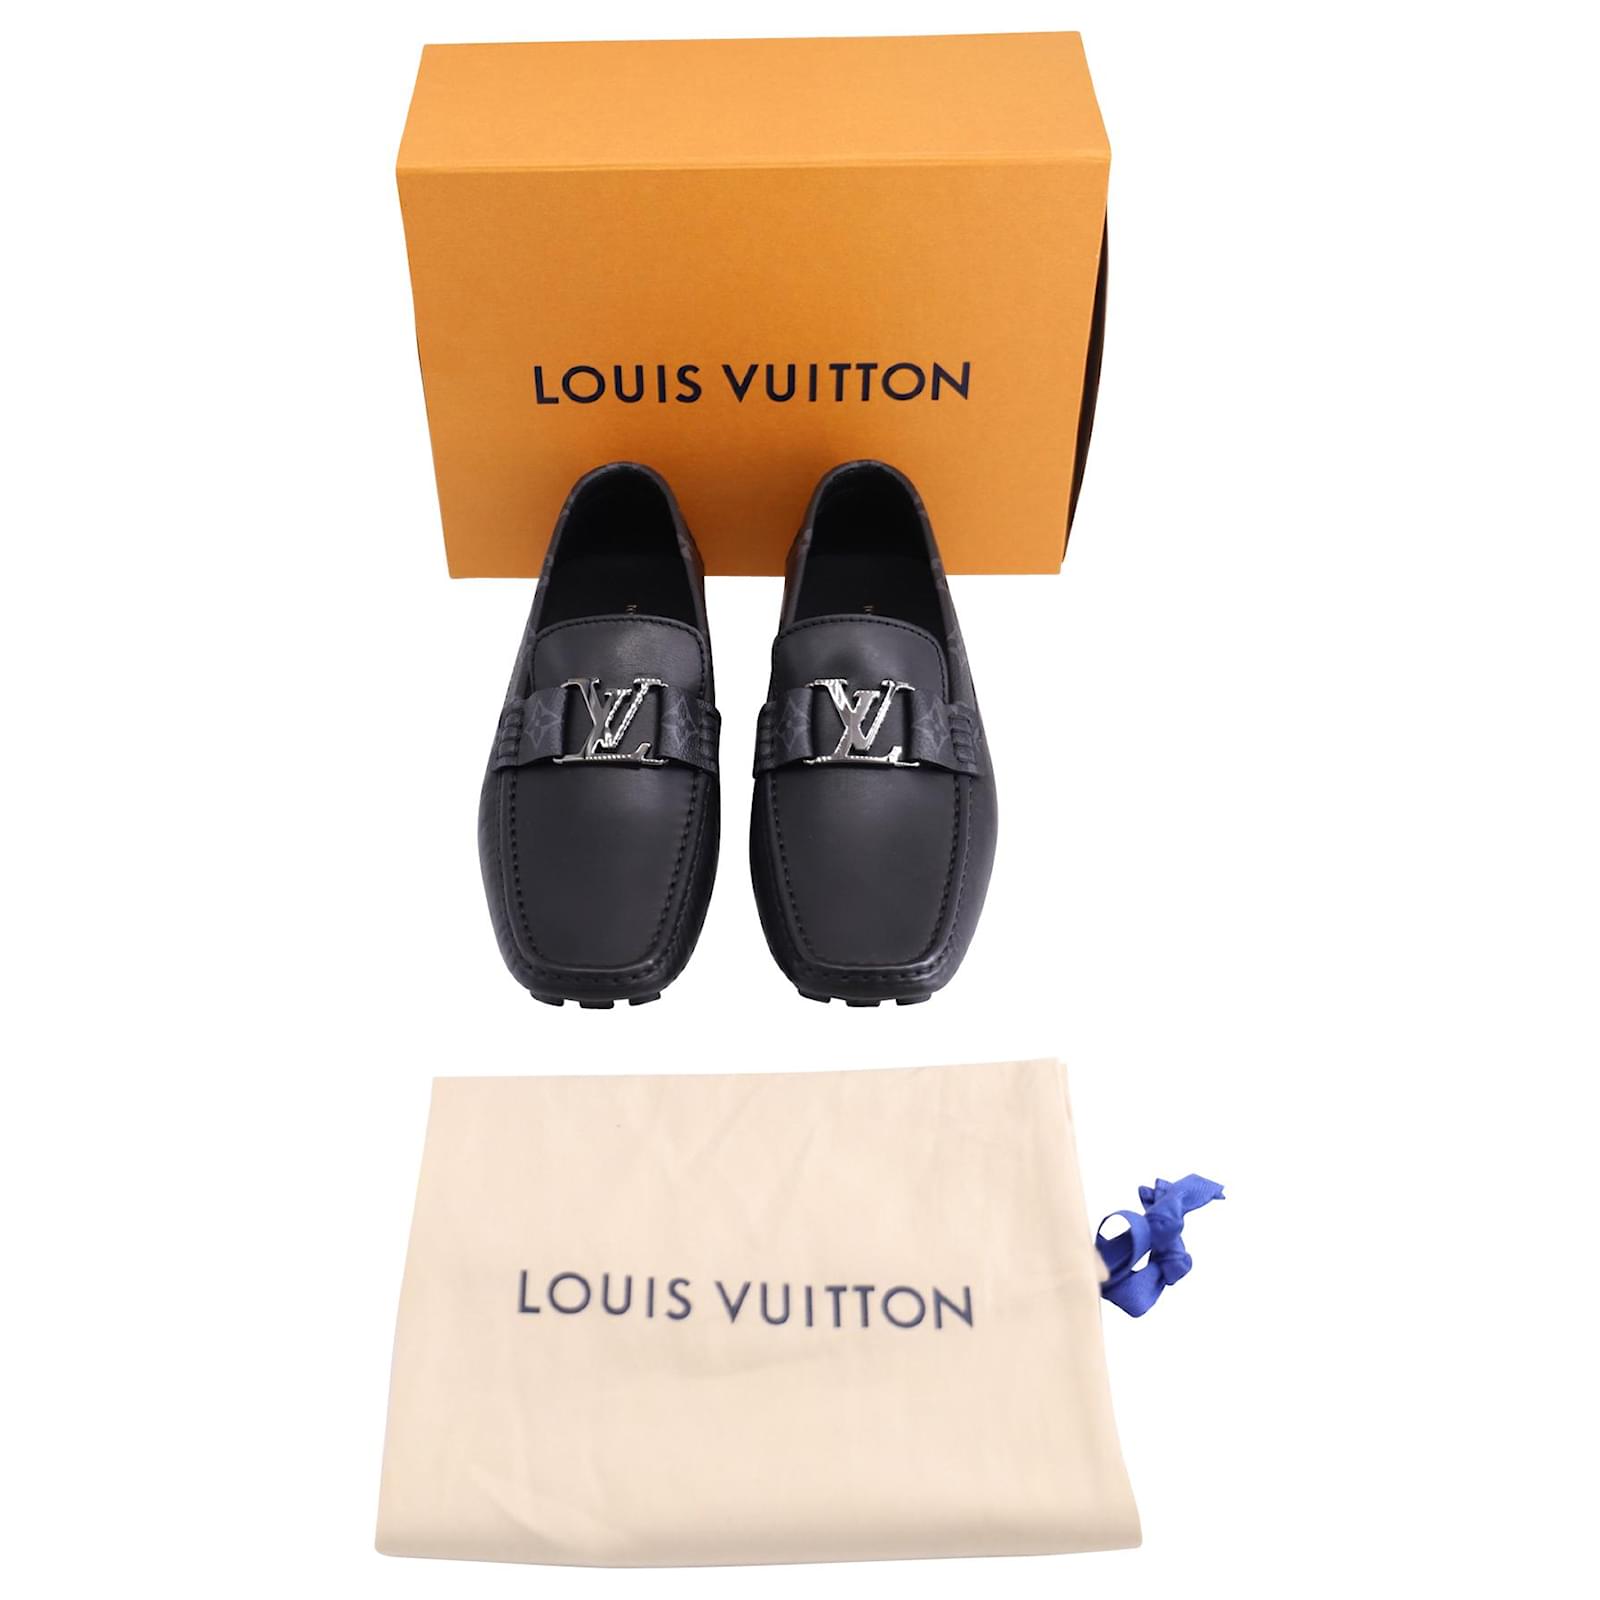 Louis Vuitton Monte Carlo Moccasin in Black Calfskin Leather Pony